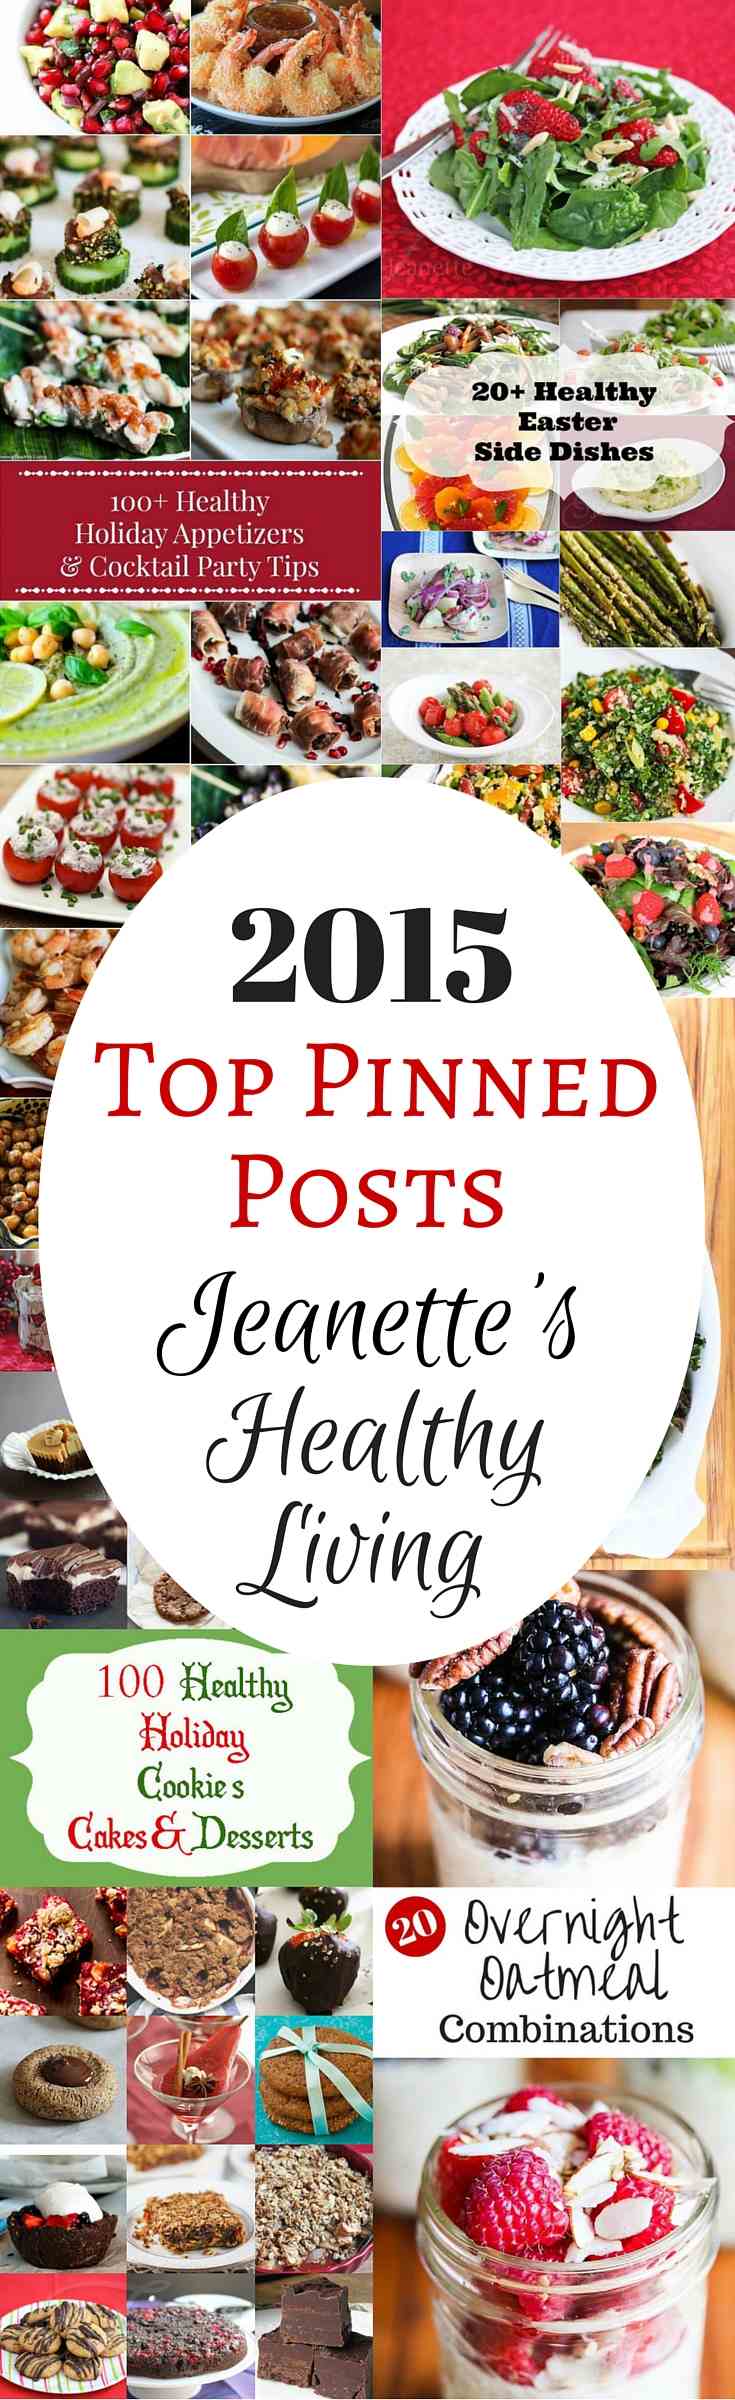 2015 Top Pinned Posts on Jeanette's Healthy Living - pin or bookmark this post for tons of healthy recipe ideas throughout the year